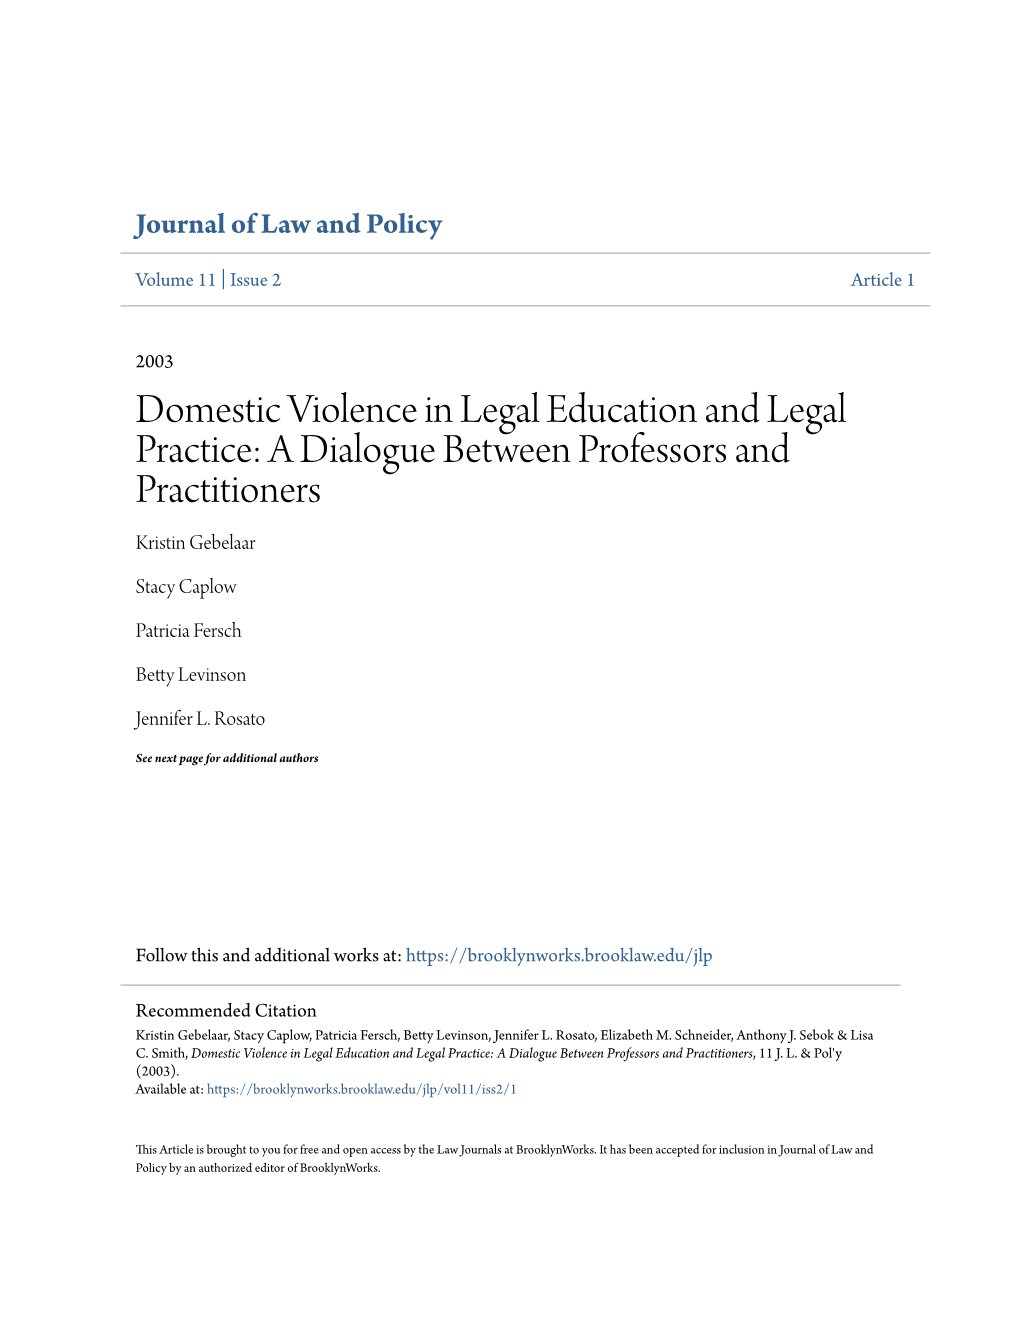 Domestic Violence in Legal Education and Legal Practice: a Dialogue Between Professors and Practitioners Kristin Gebelaar